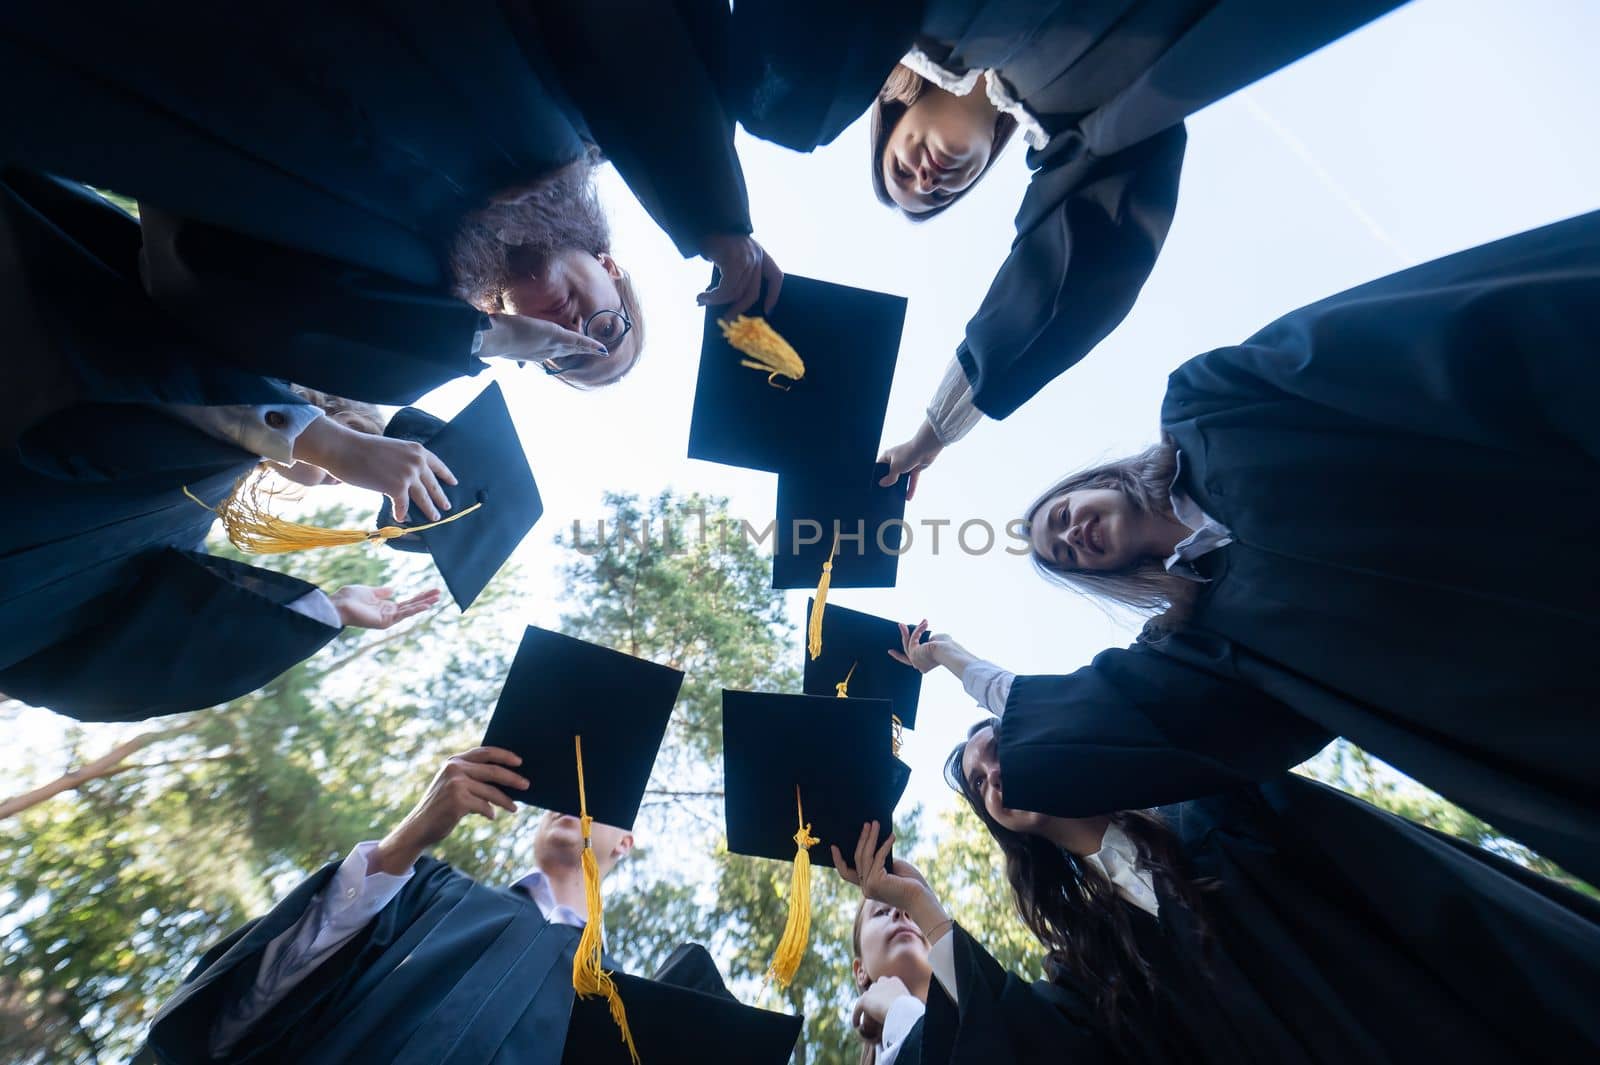 Classmates in graduation gowns toss their hats outdoors. Bottom view